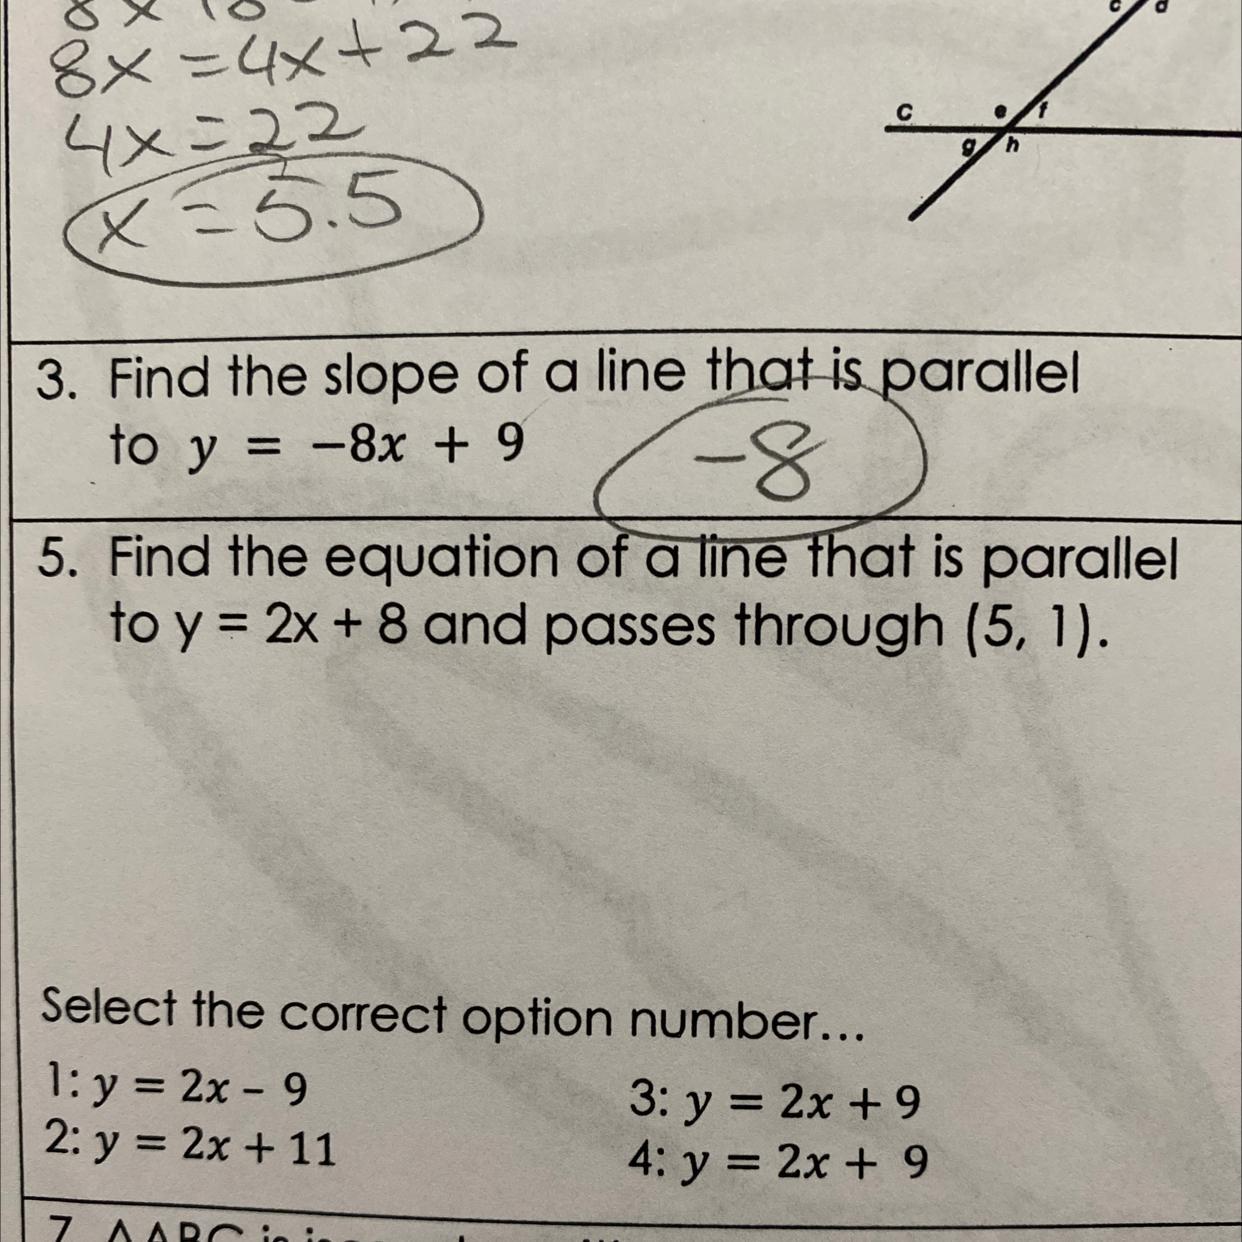 5. Find The Equation Of A Line That Is Parallel To Y = 2x + 8 And Passes Through (5, 1).